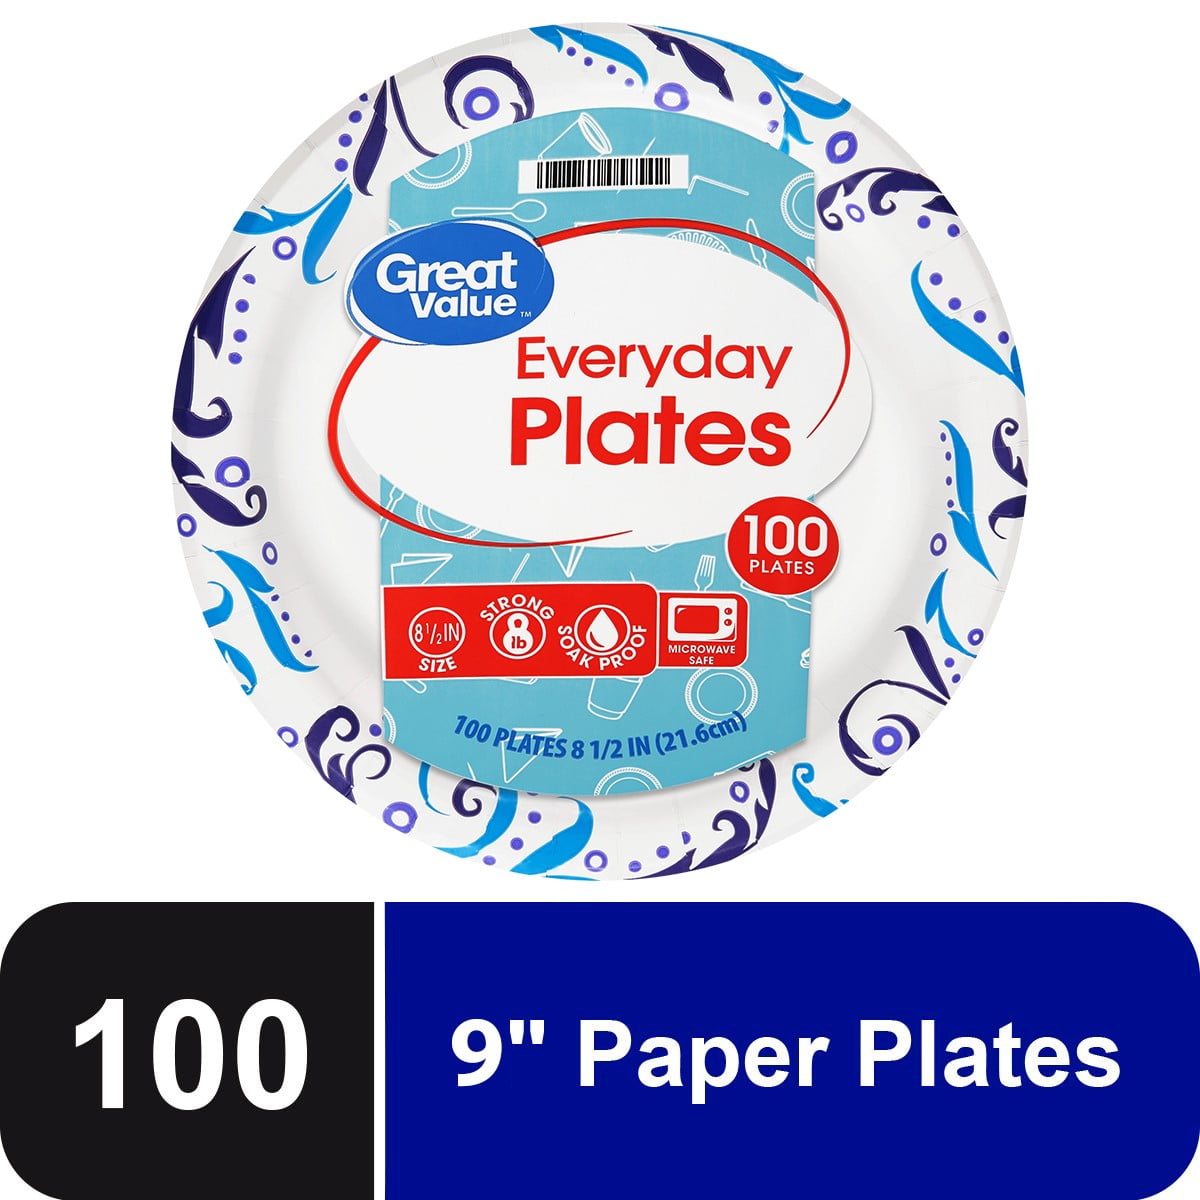 JOLLY CHEF 8.37 inch Paper Plates 140 Count Soak Proof, Cut Proof